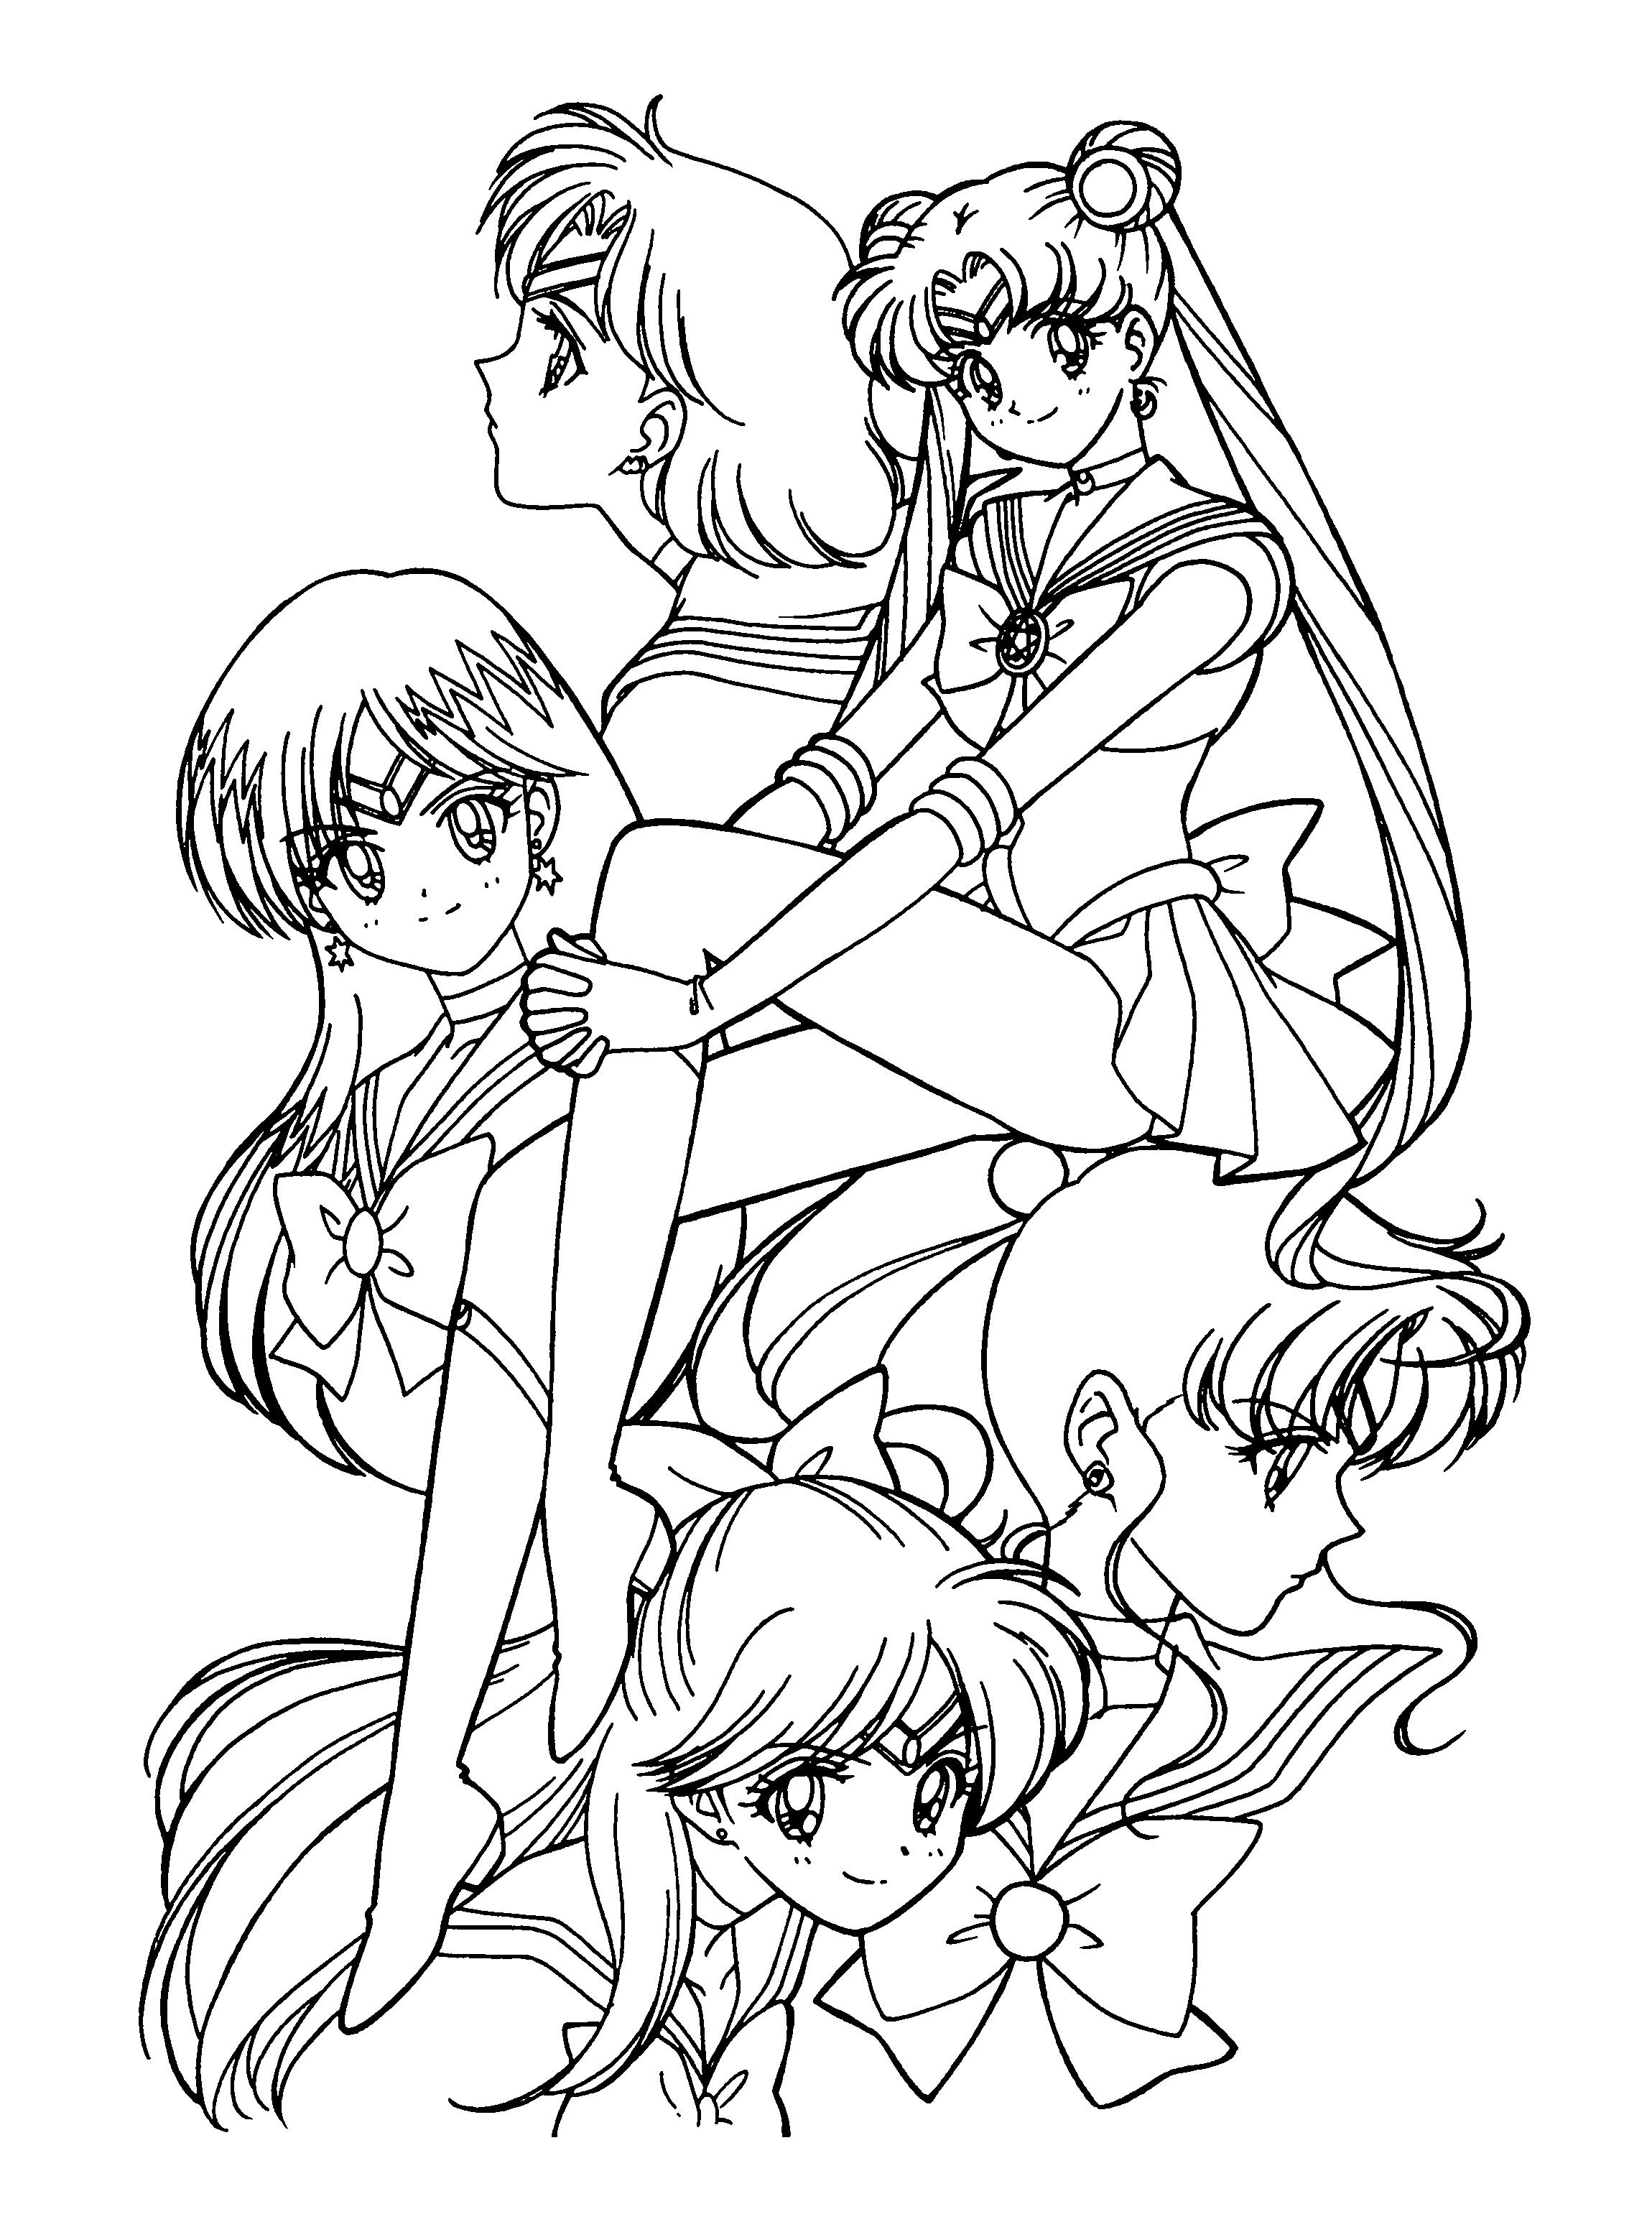 sailor moon all sailor scouts coloring pages - photo #40